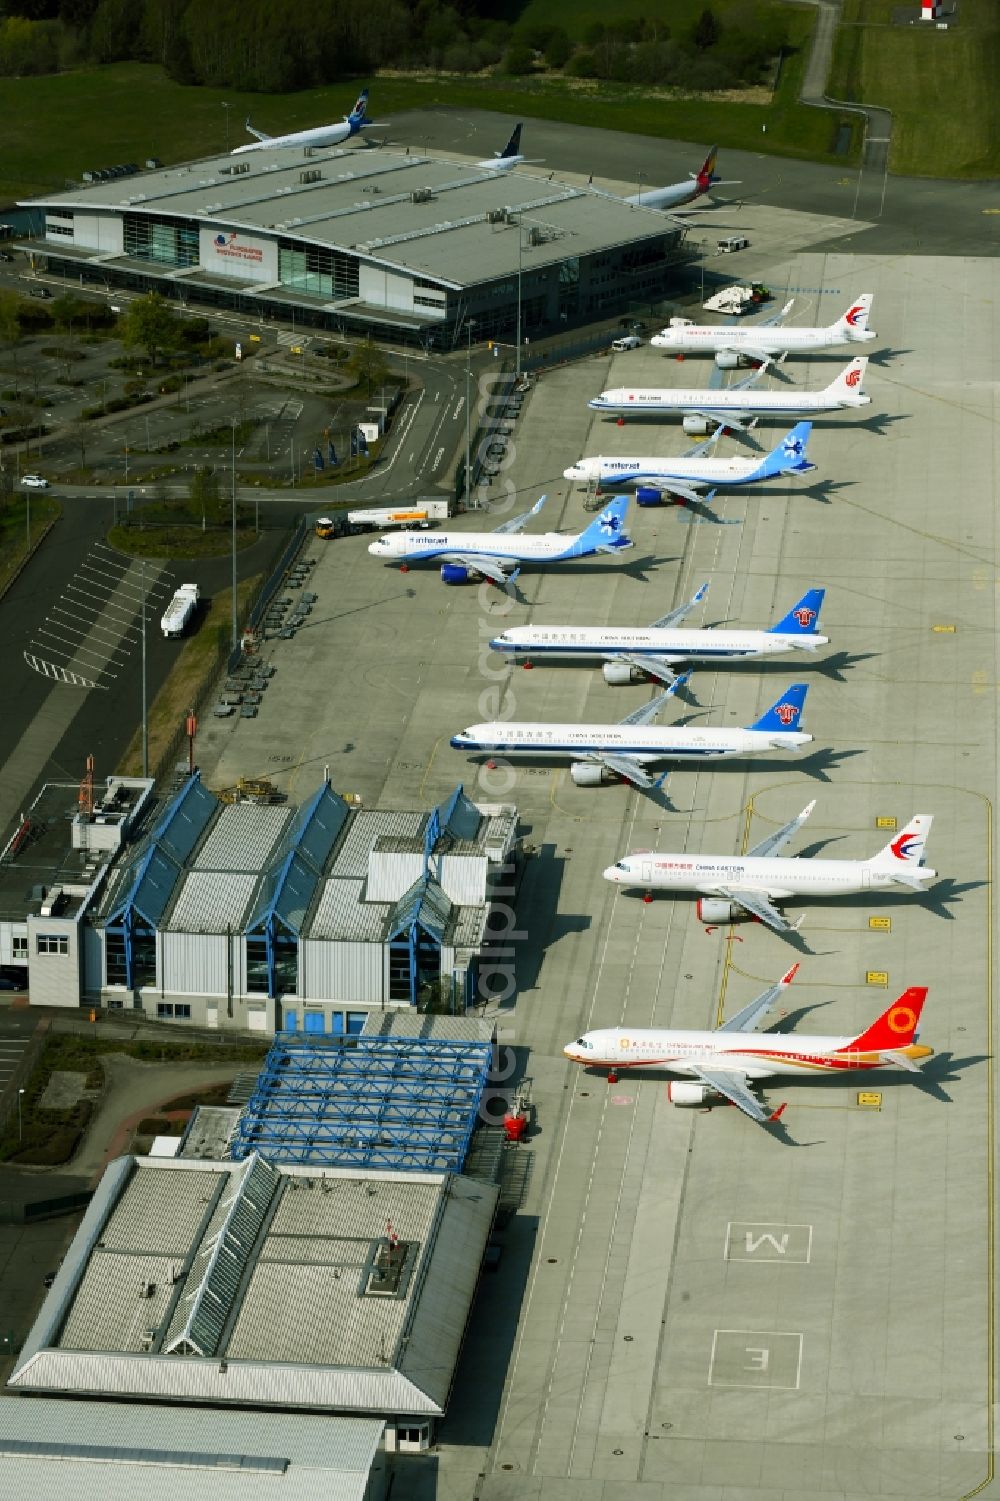 Laage from the bird's eye view: Brand new Airbus A321-253NX passenger aircraft parked for export to China - parked due to the crisis - parking space at the airport in Laage in the state of Mecklenburg-West Pomerania, Germany